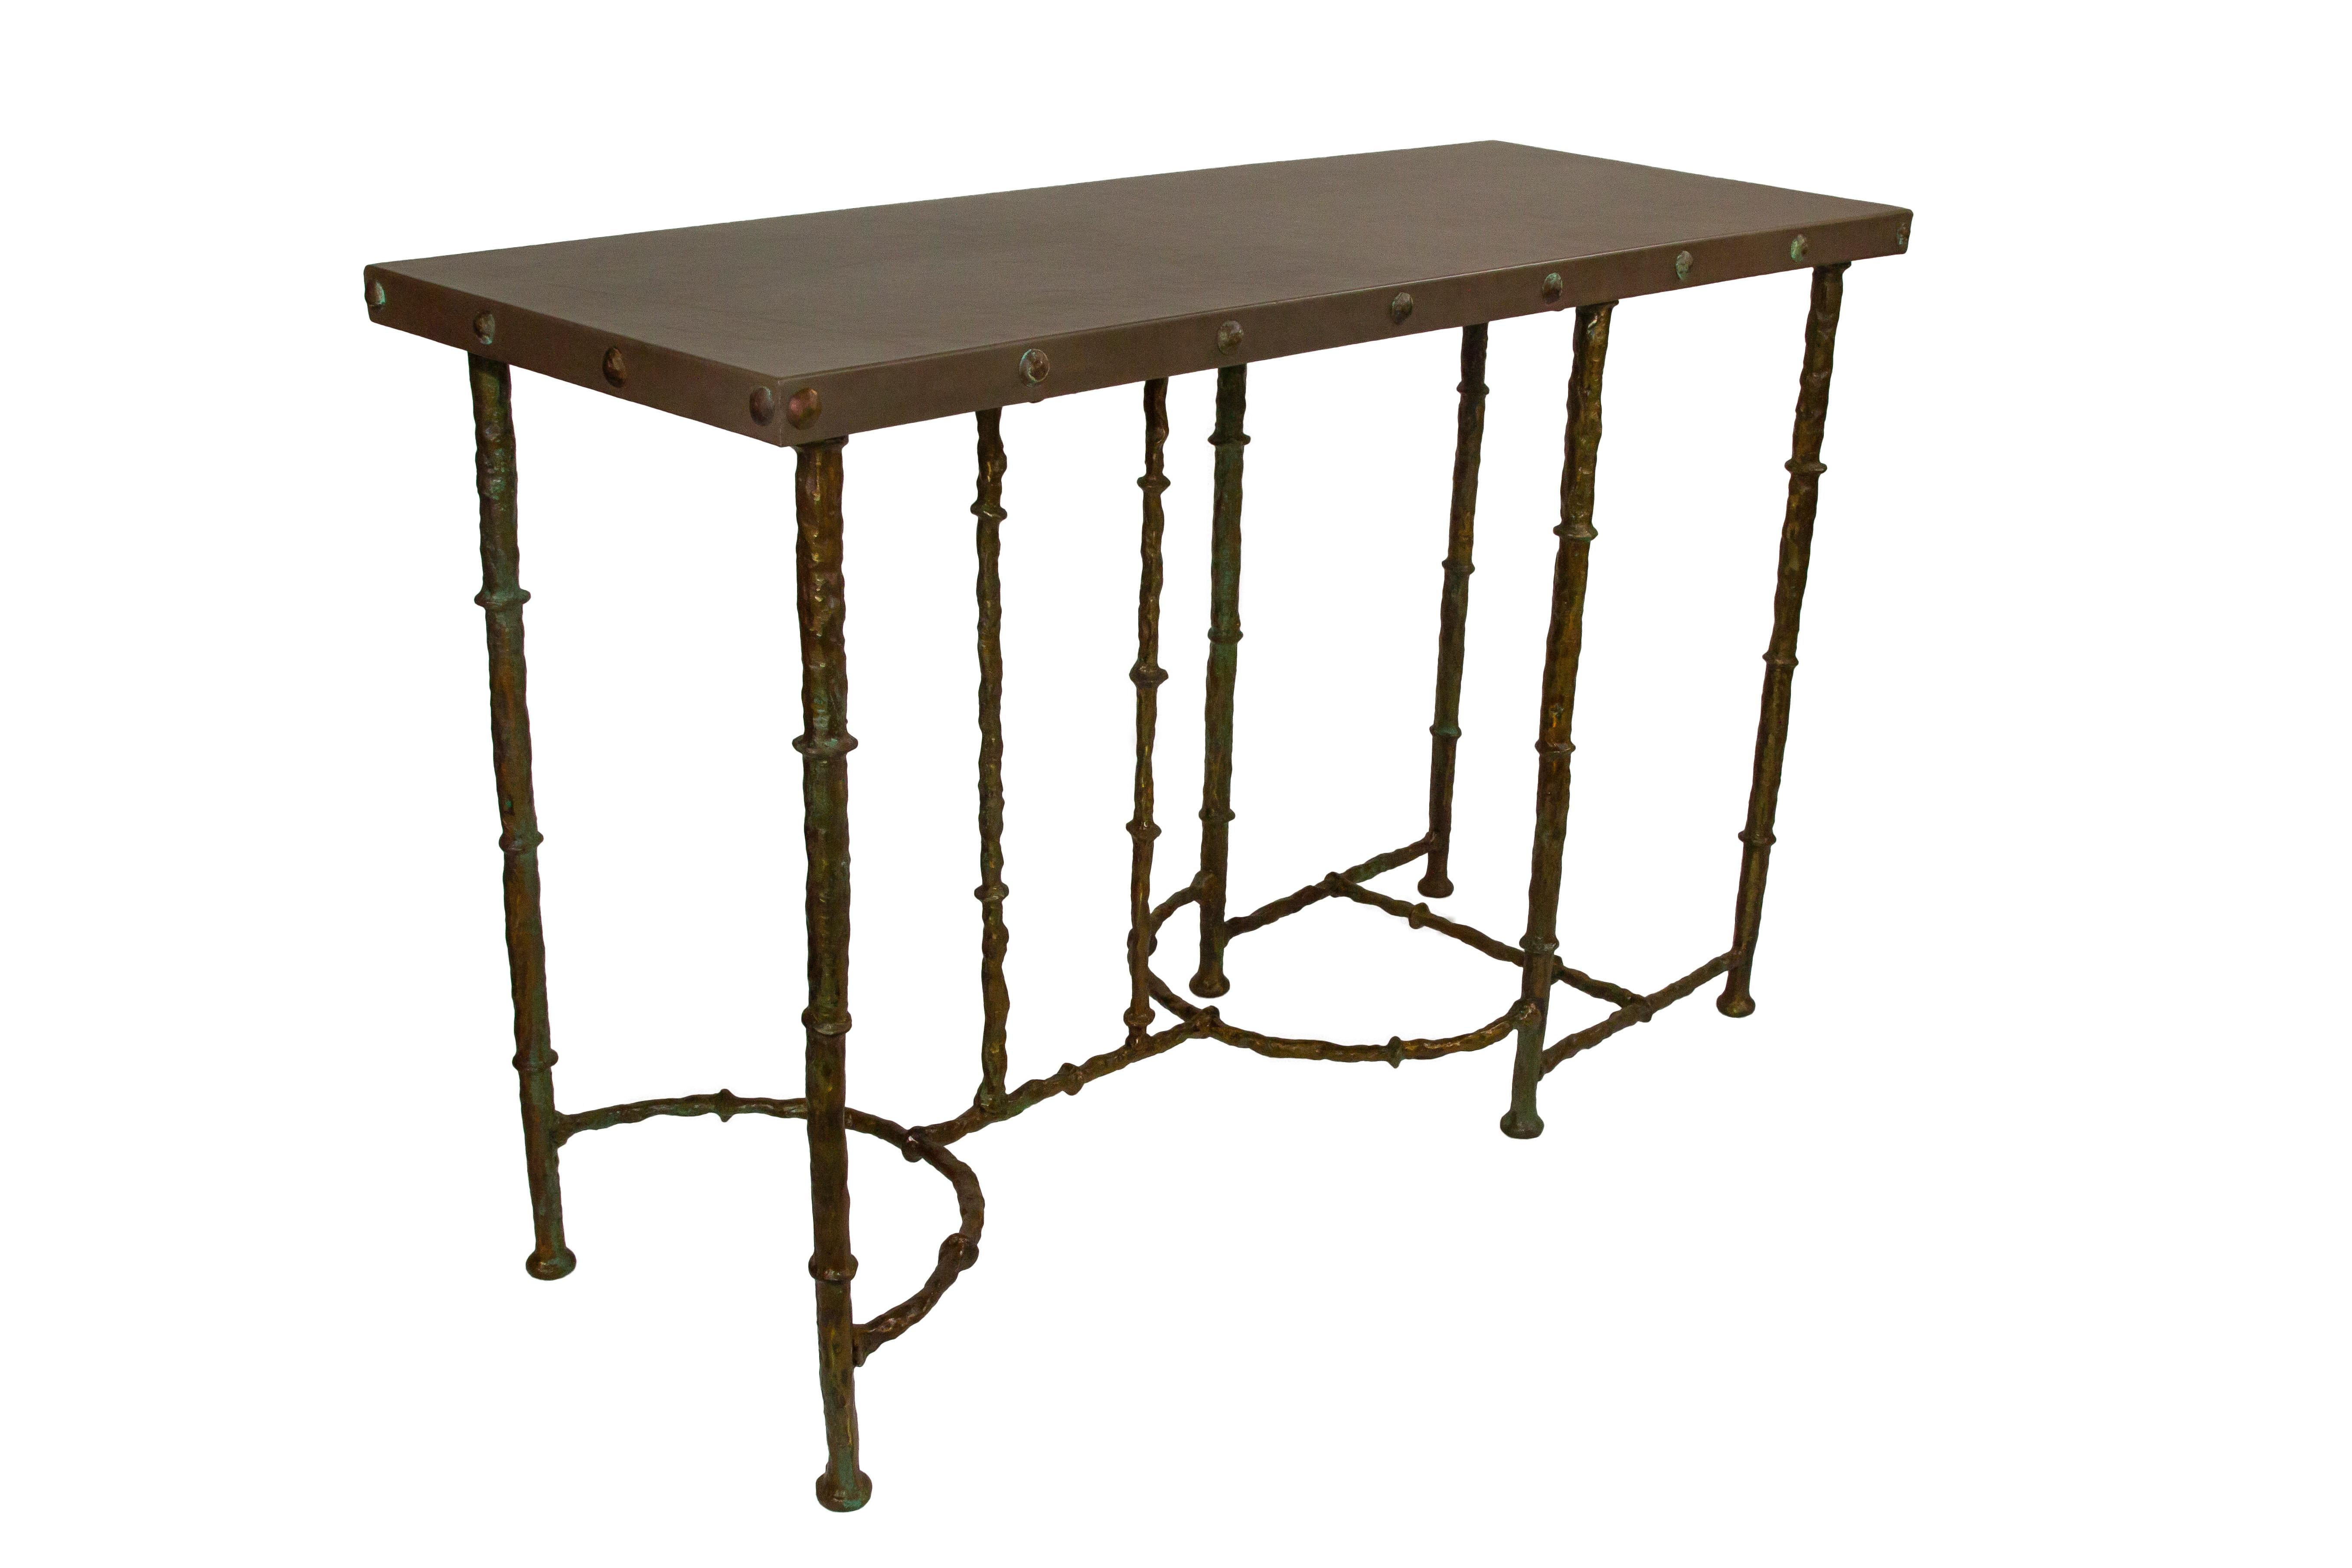 The hand-sculpted bronze console is a hand forged and handcrafted edition with leather top or glass or stone , fastened by bronze sculpted nails; each piece is numbered and stamped. Custom sizes and finishes available.